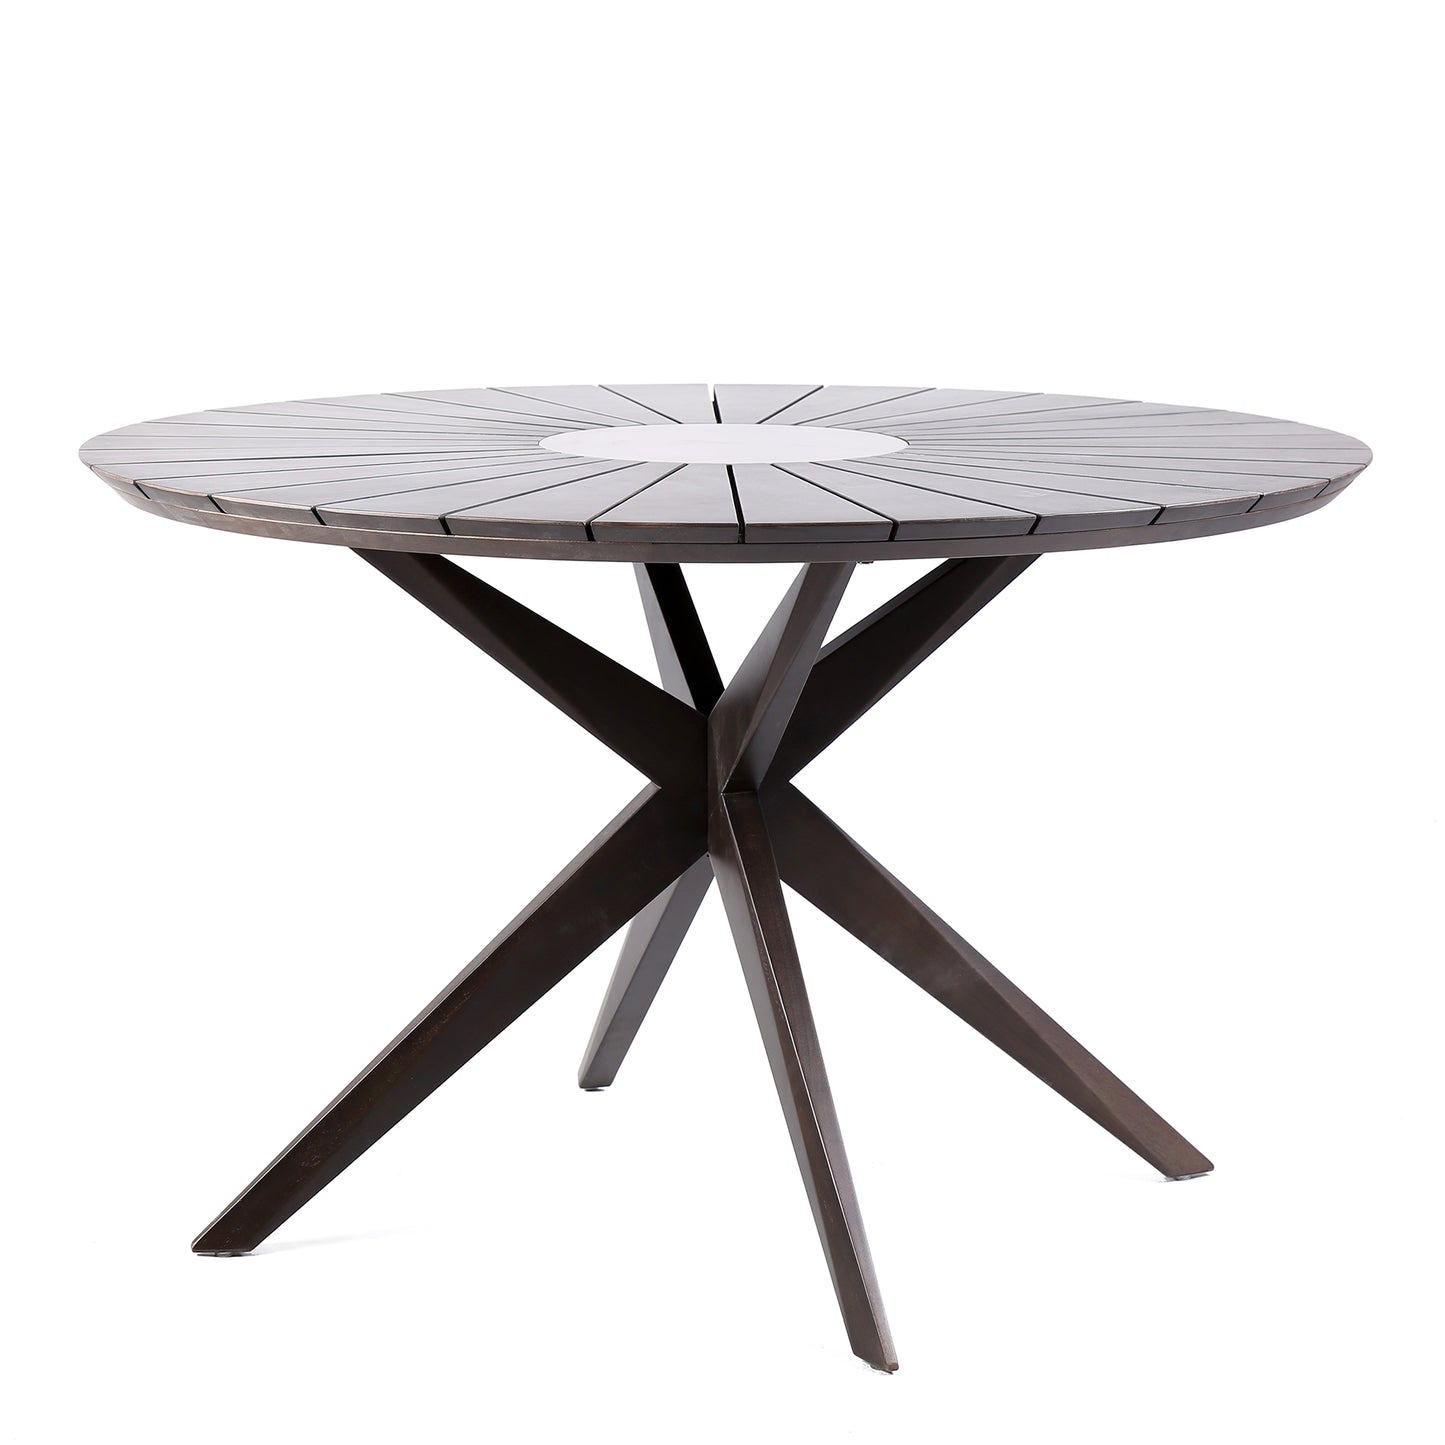 Oasis and Brielle Outdoor 5 Piece Dark Eucalyptus and Concrete Dining Set